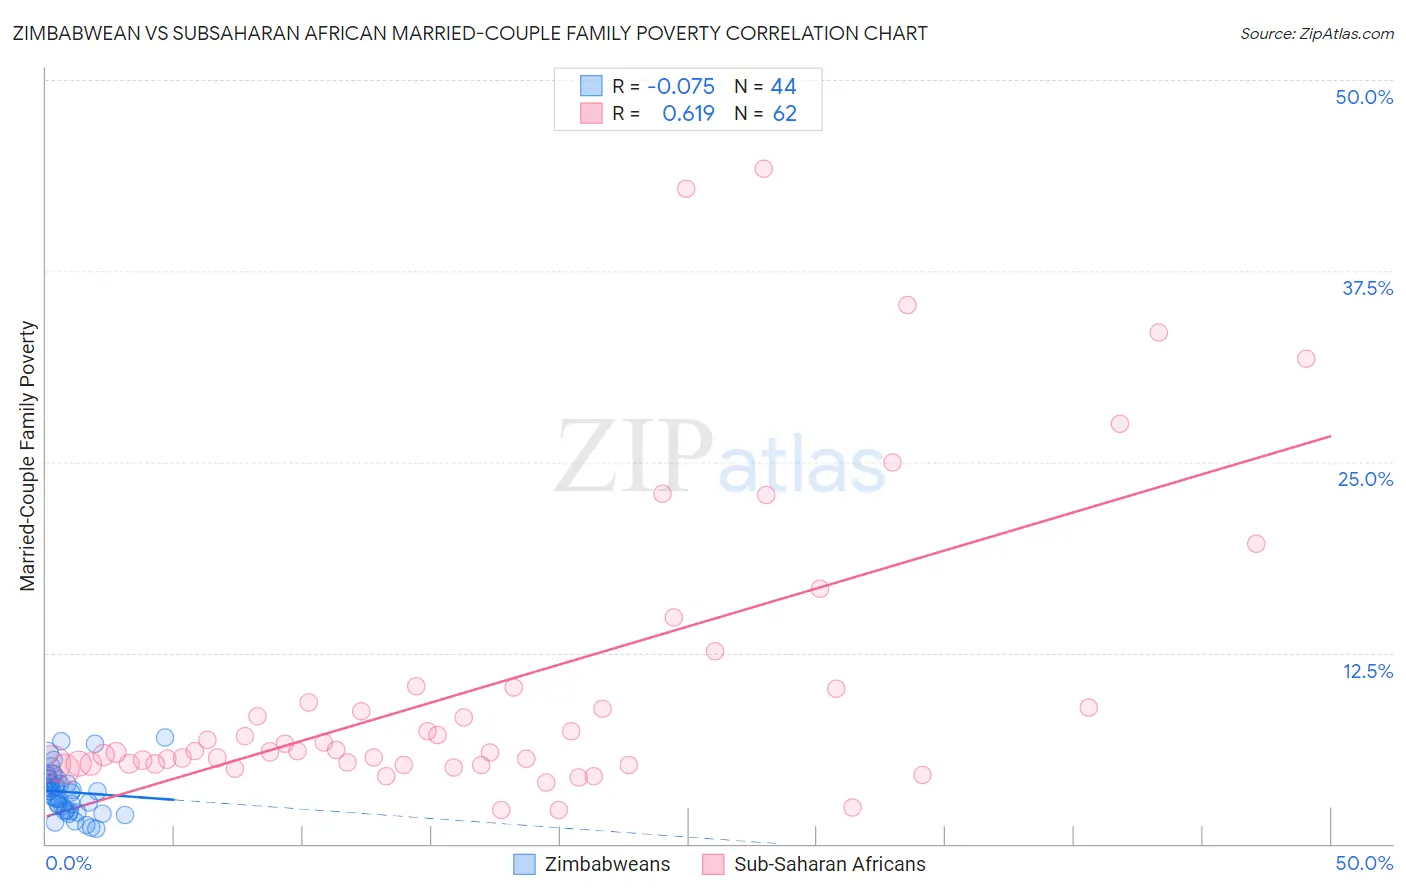 Zimbabwean vs Subsaharan African Married-Couple Family Poverty